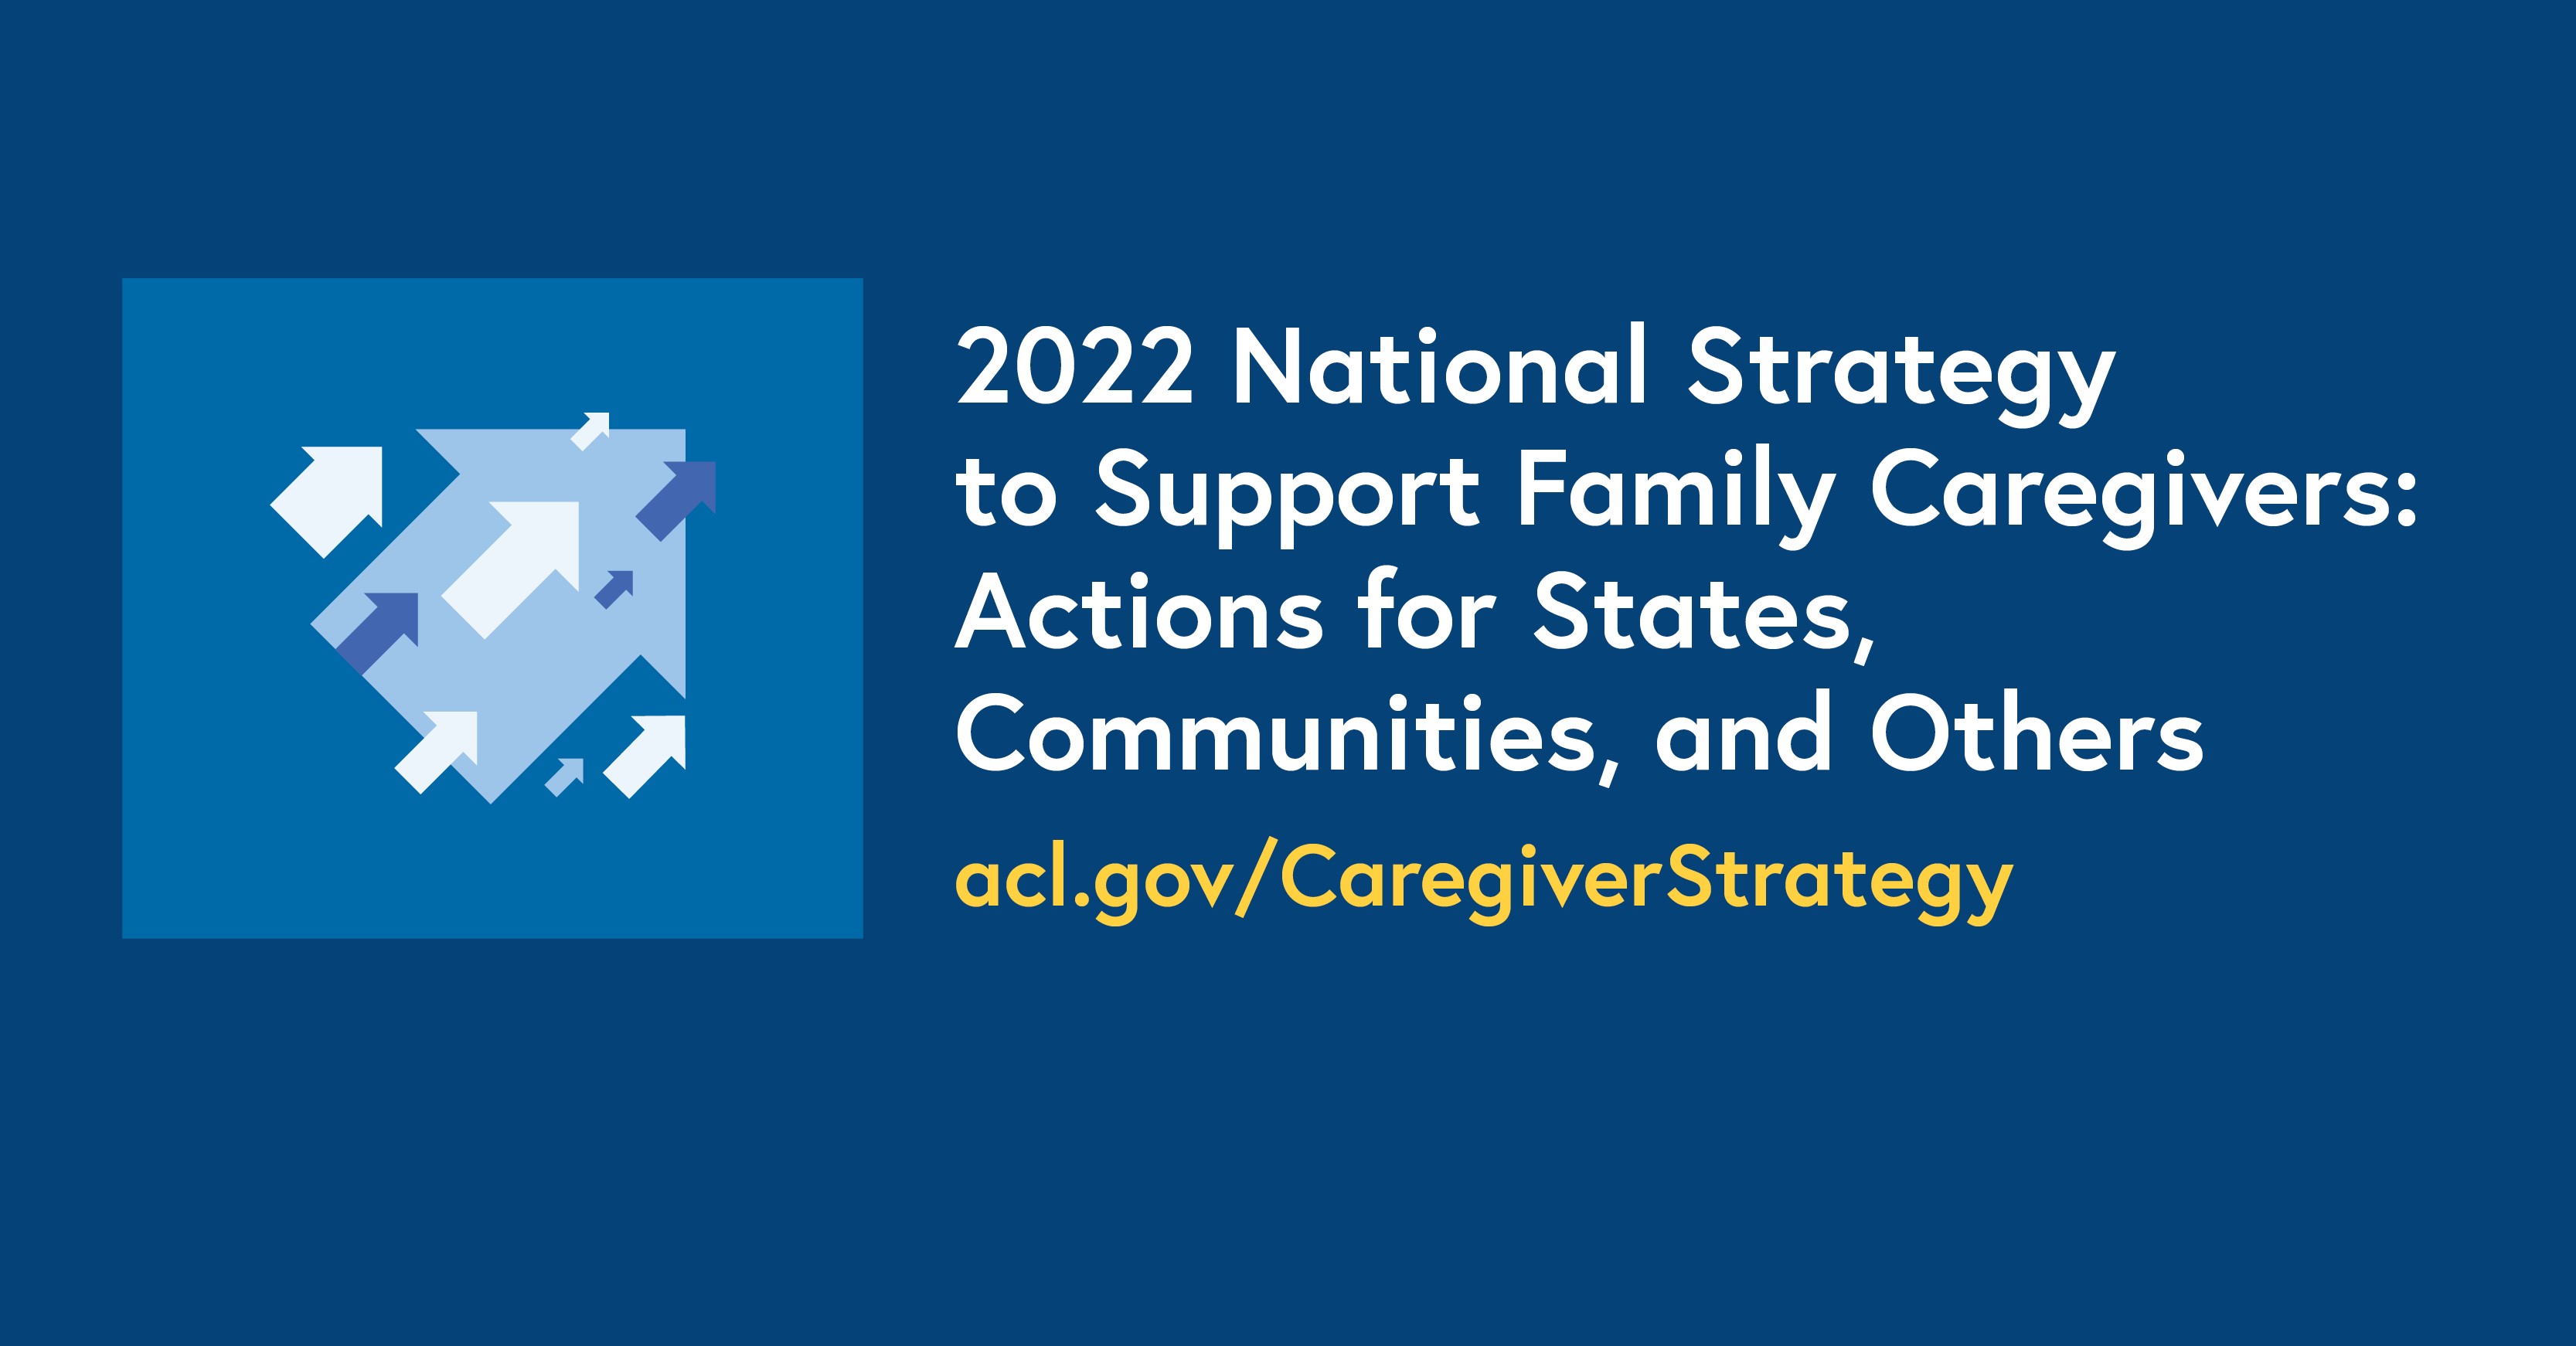 2022 National Strategy to Support Family Caregivers: Actions for States, Communities, and Others. acl.gov/CaregiverStrategy